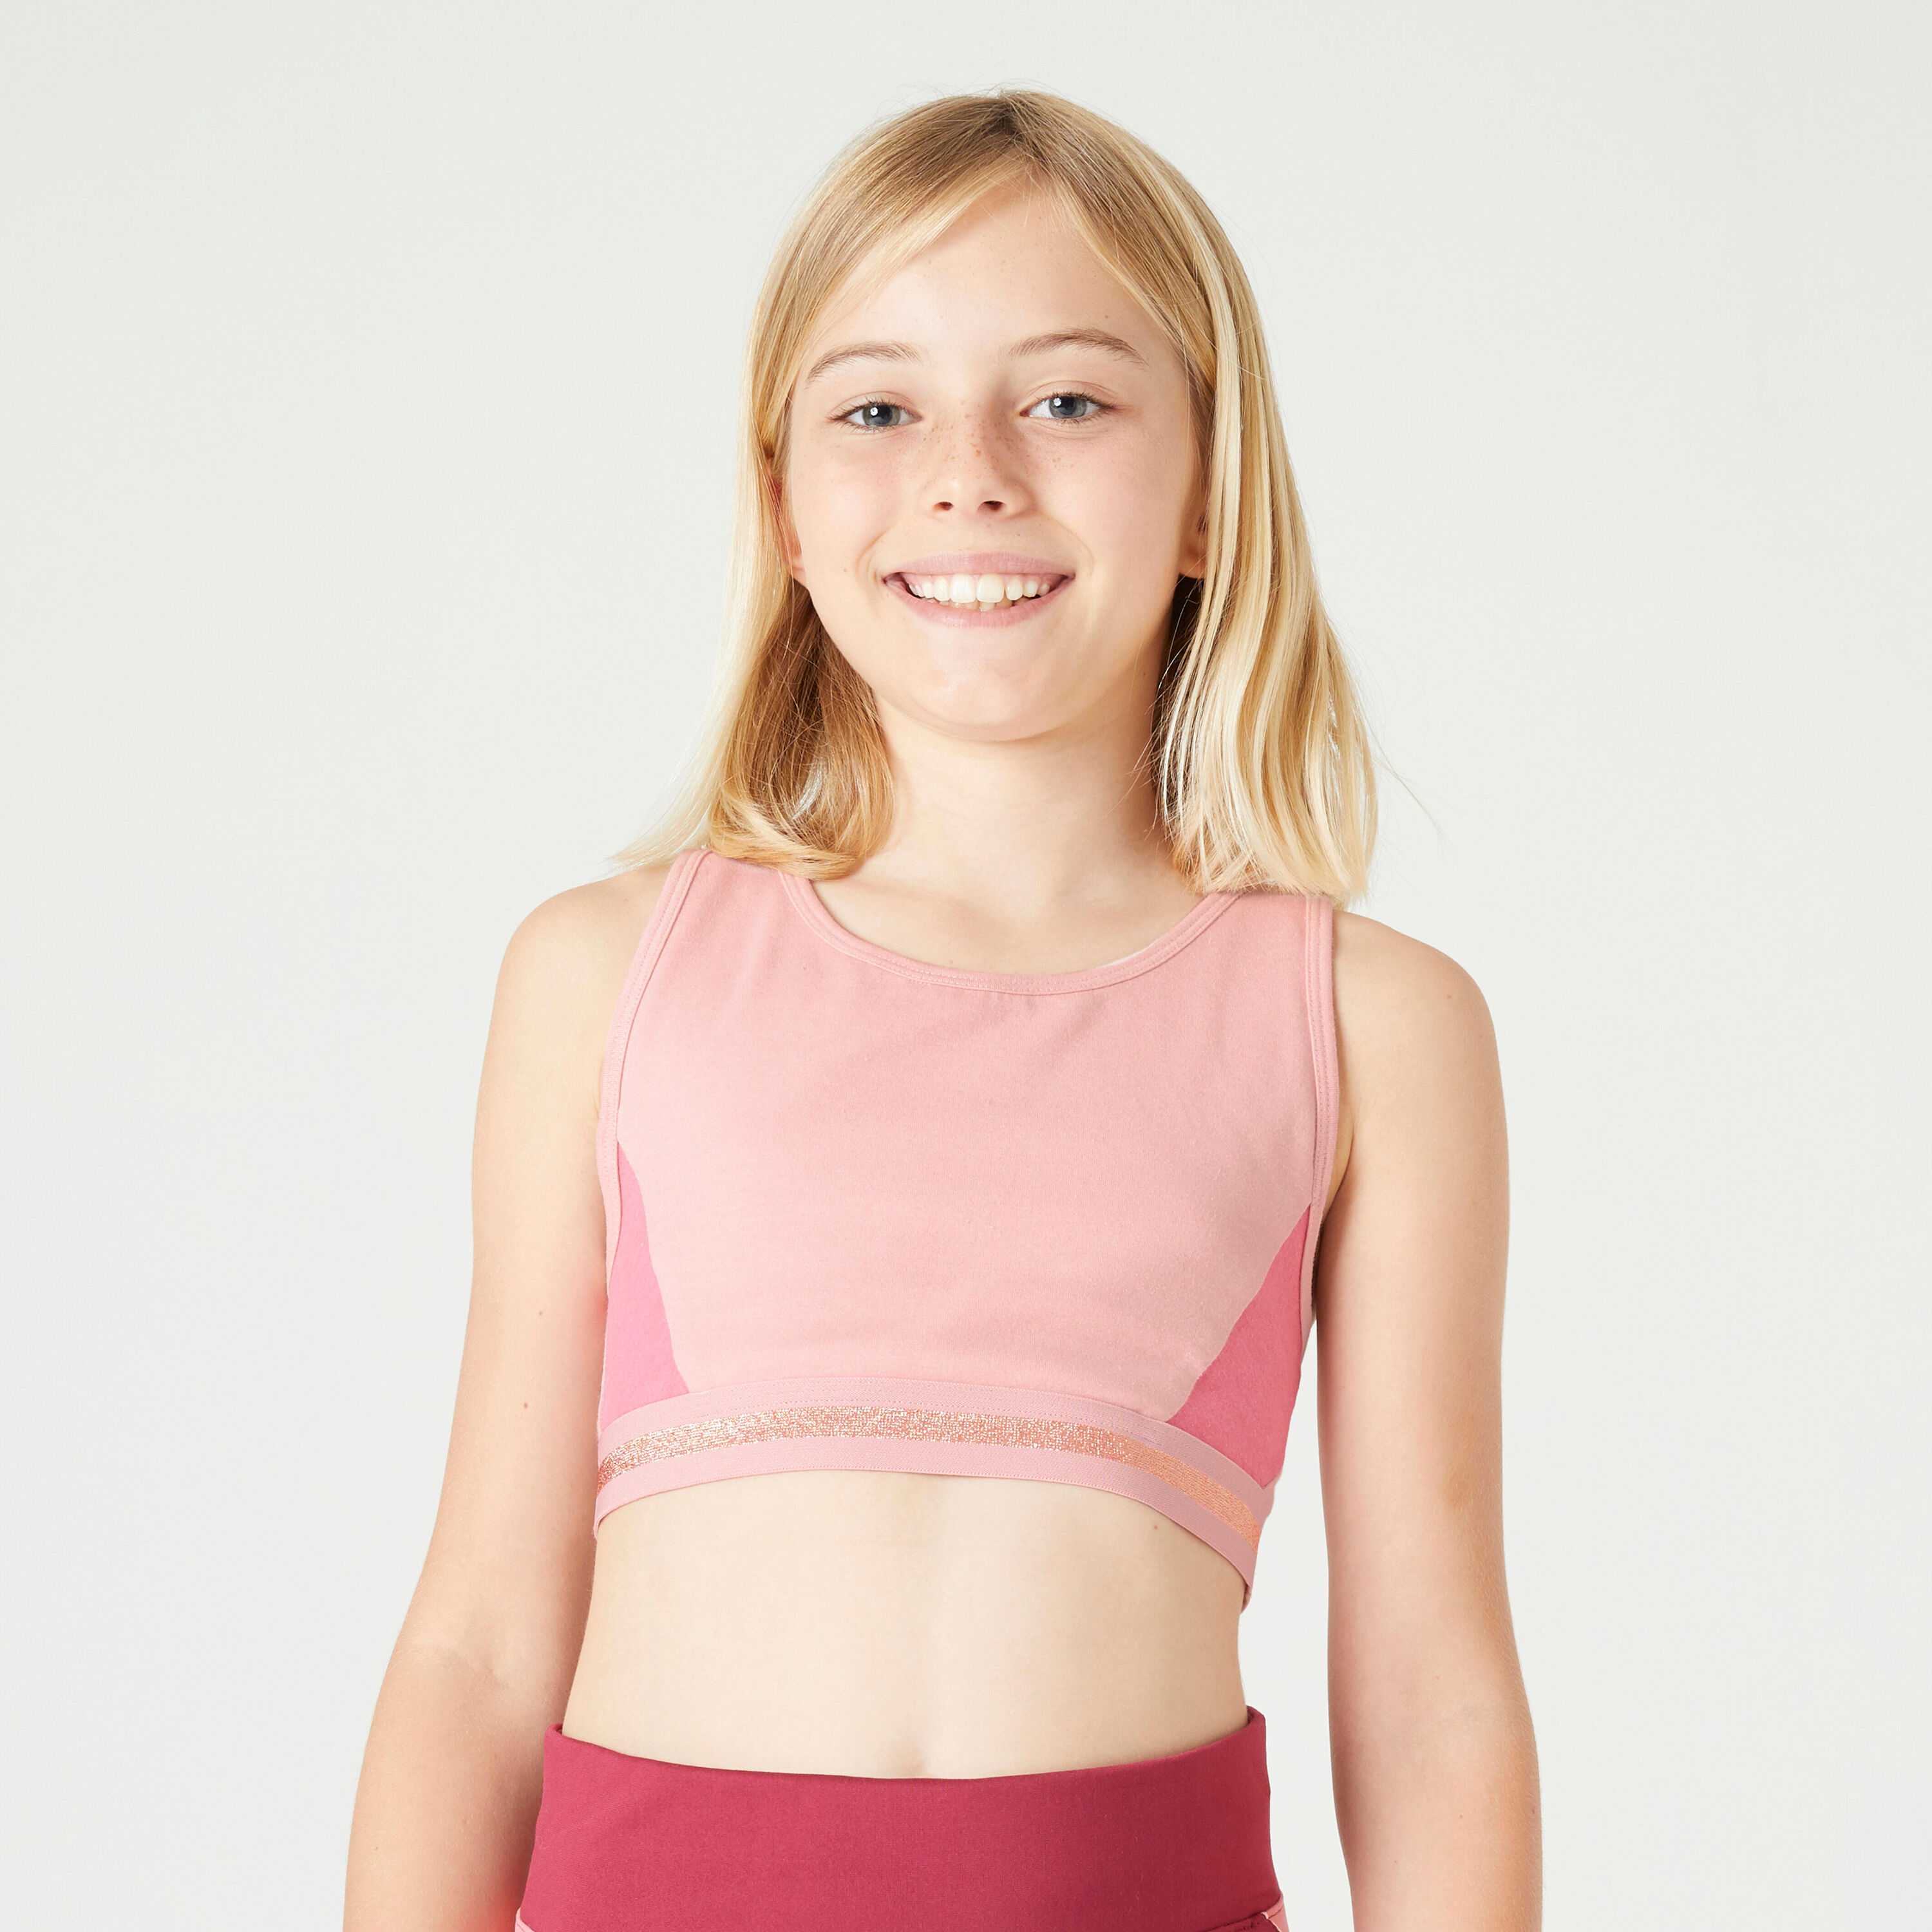 Clearance Girls' Sports Bras  Curbside Pickup Available at DICK'S